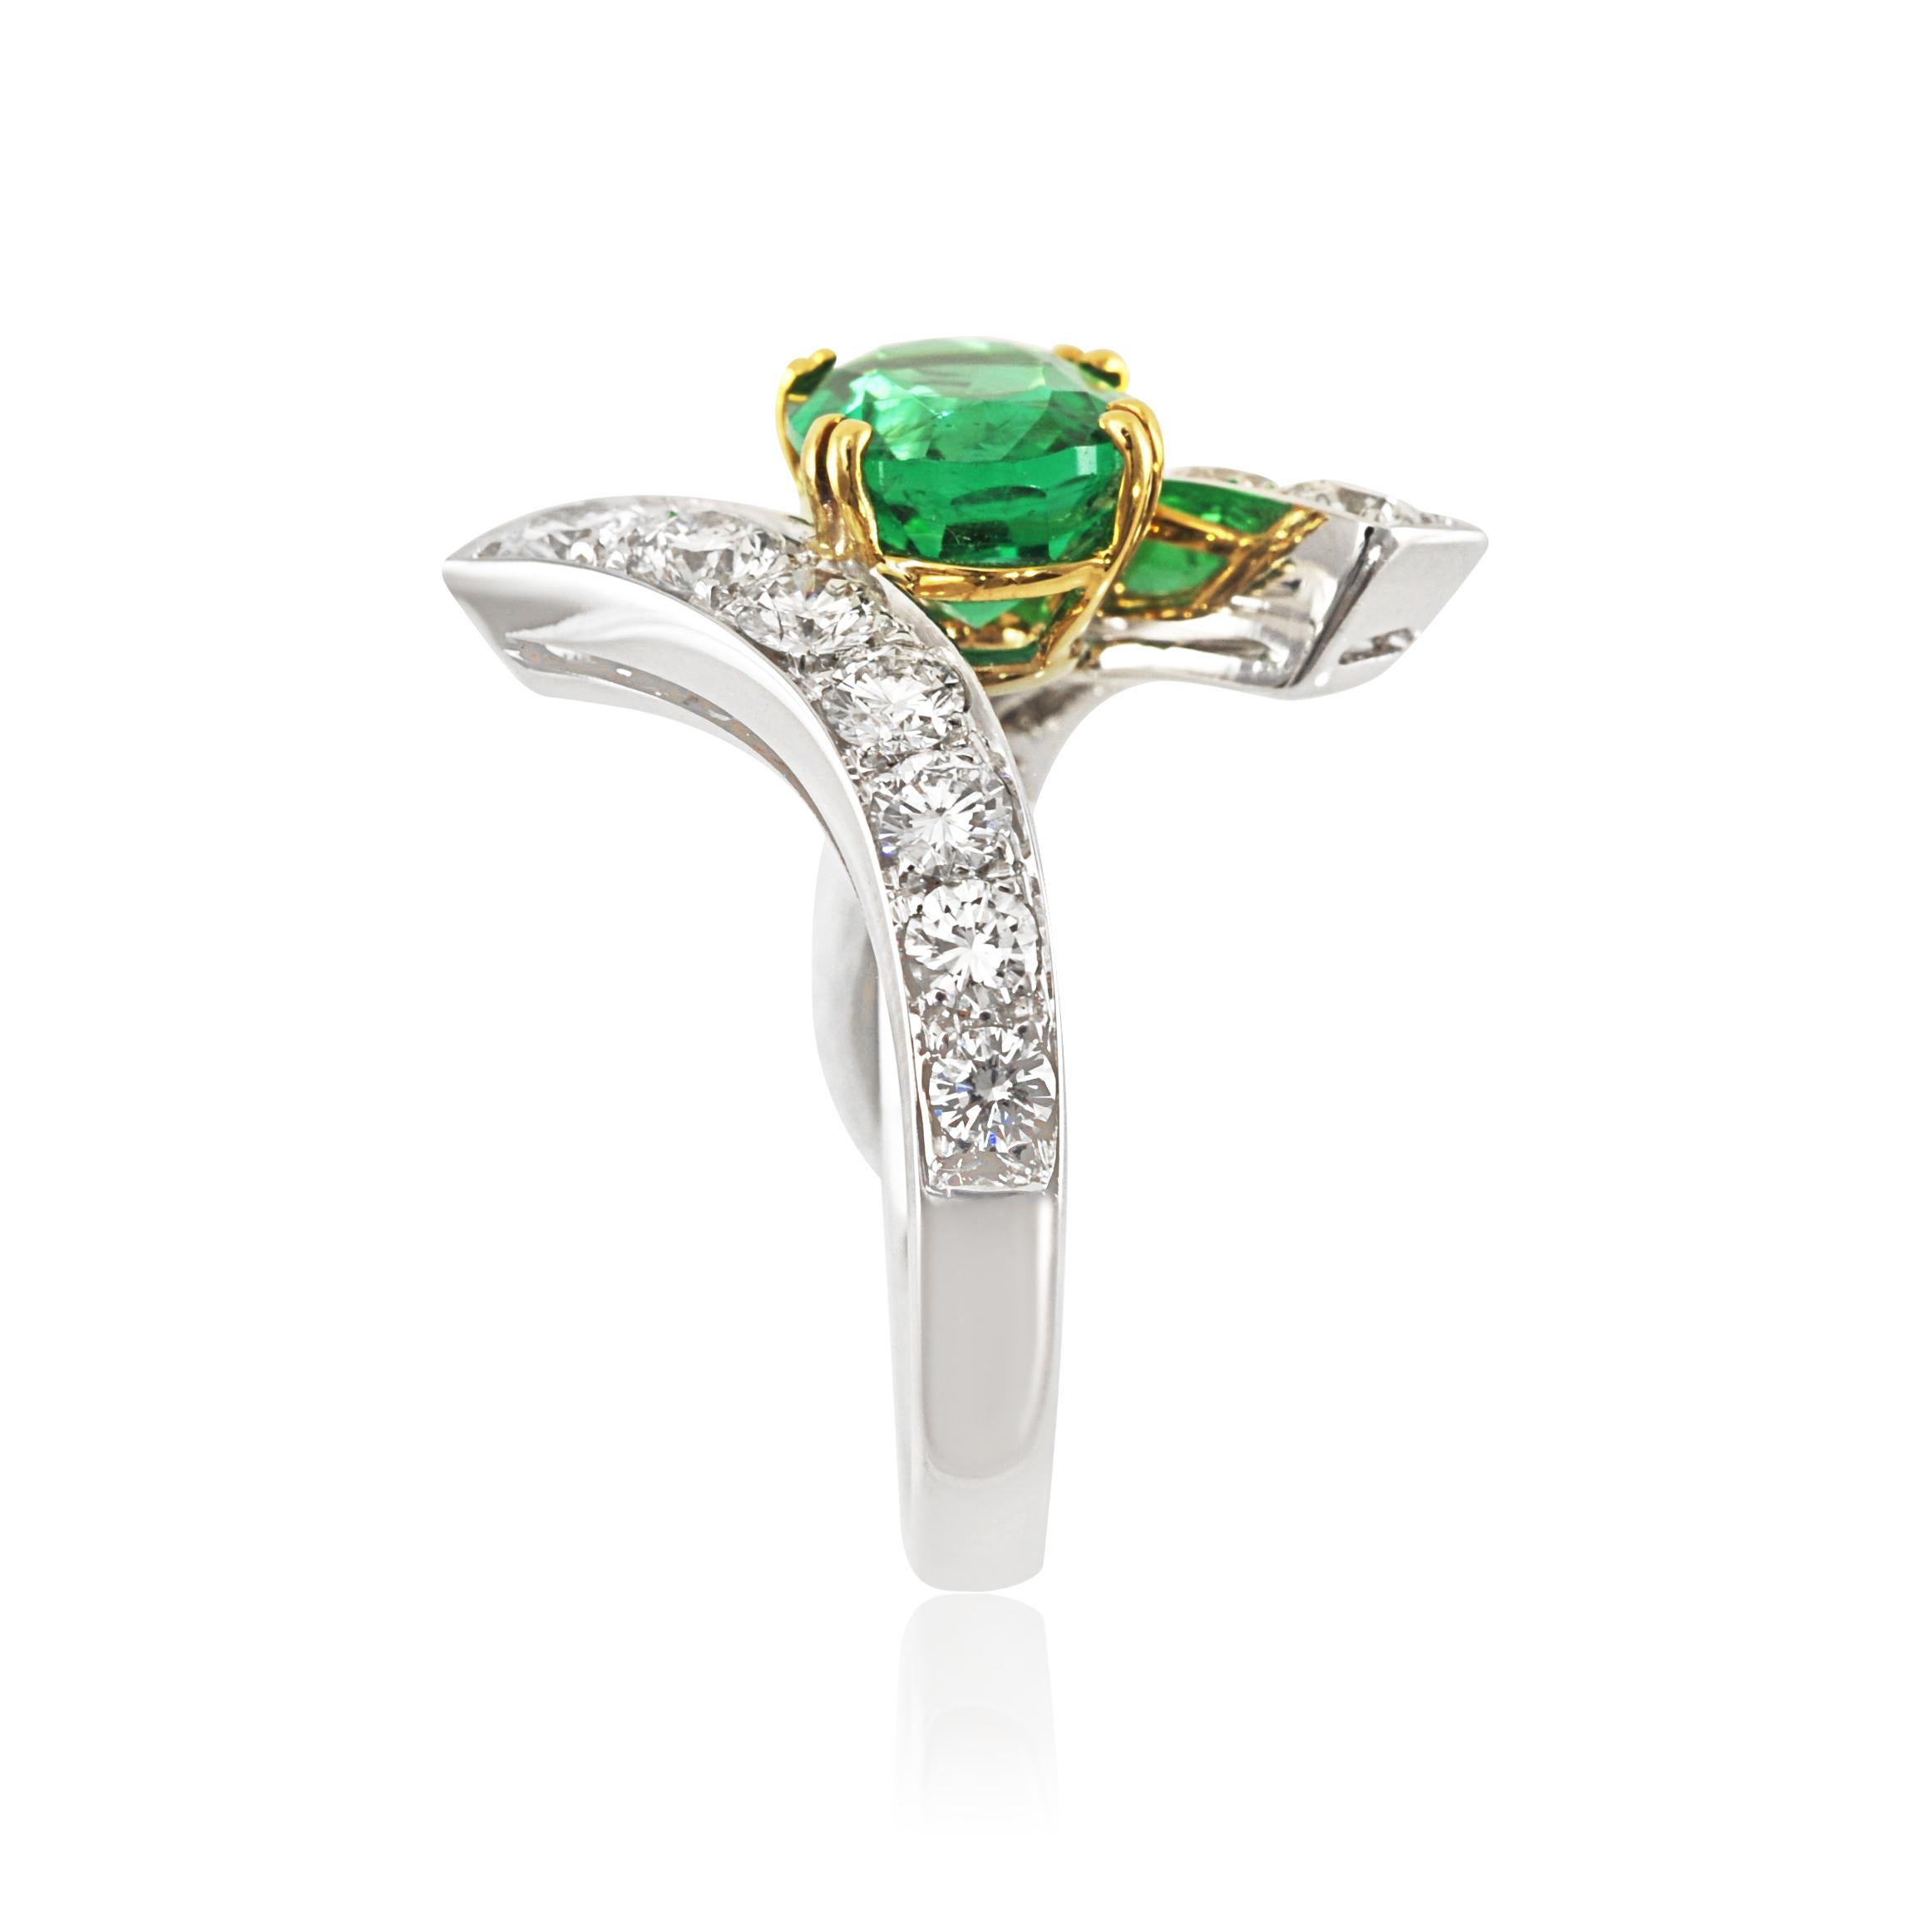 Picchiotti 18 Karat White and Yellow Gold Fashion Ring with Diamonds and Emerald In New Condition For Sale In Valenza, IT